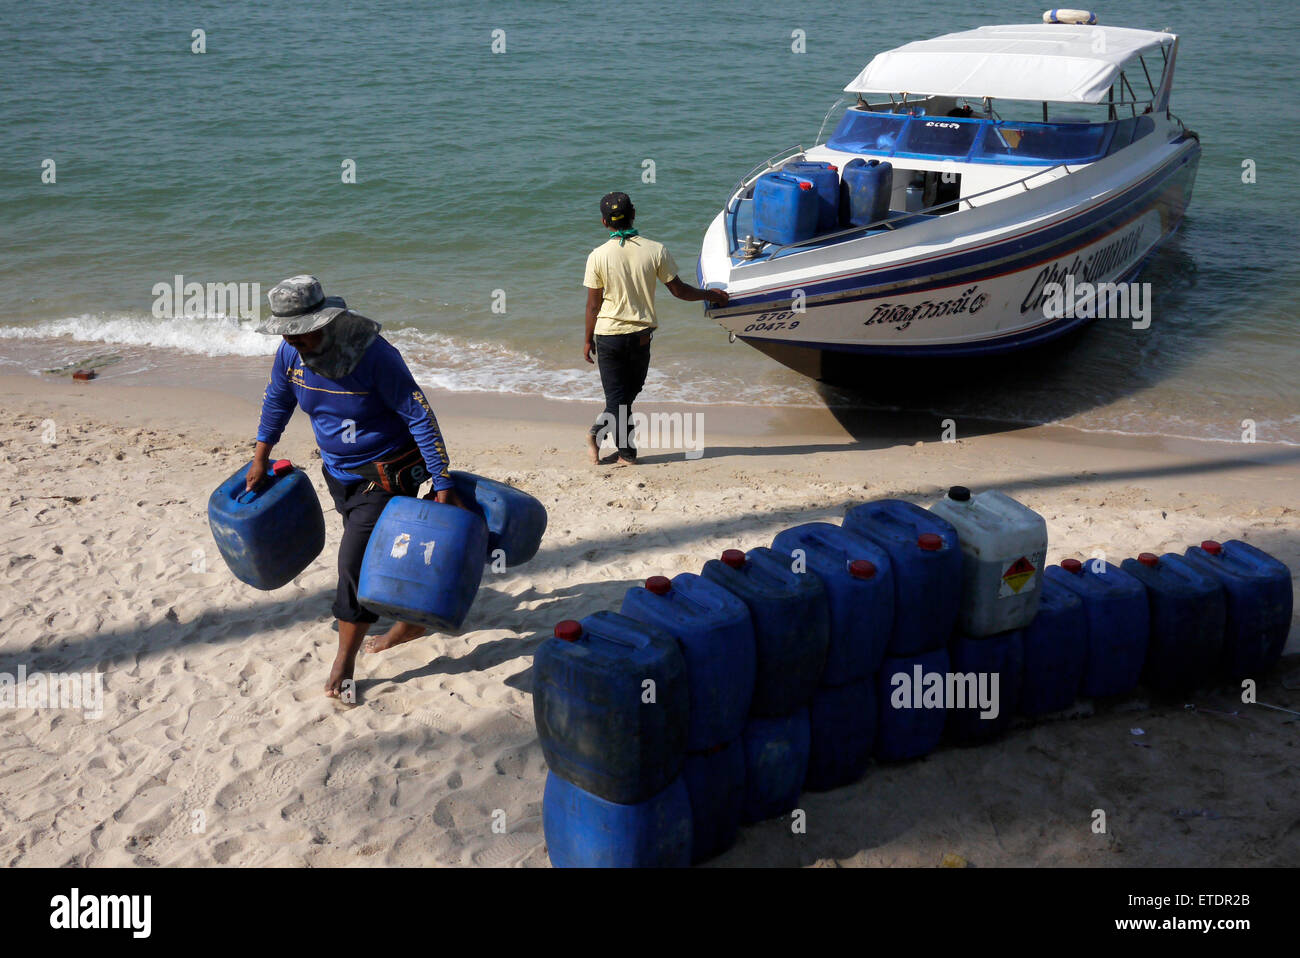 Refueling motorboat on the beach in Pattaya Thailand Stock Photo